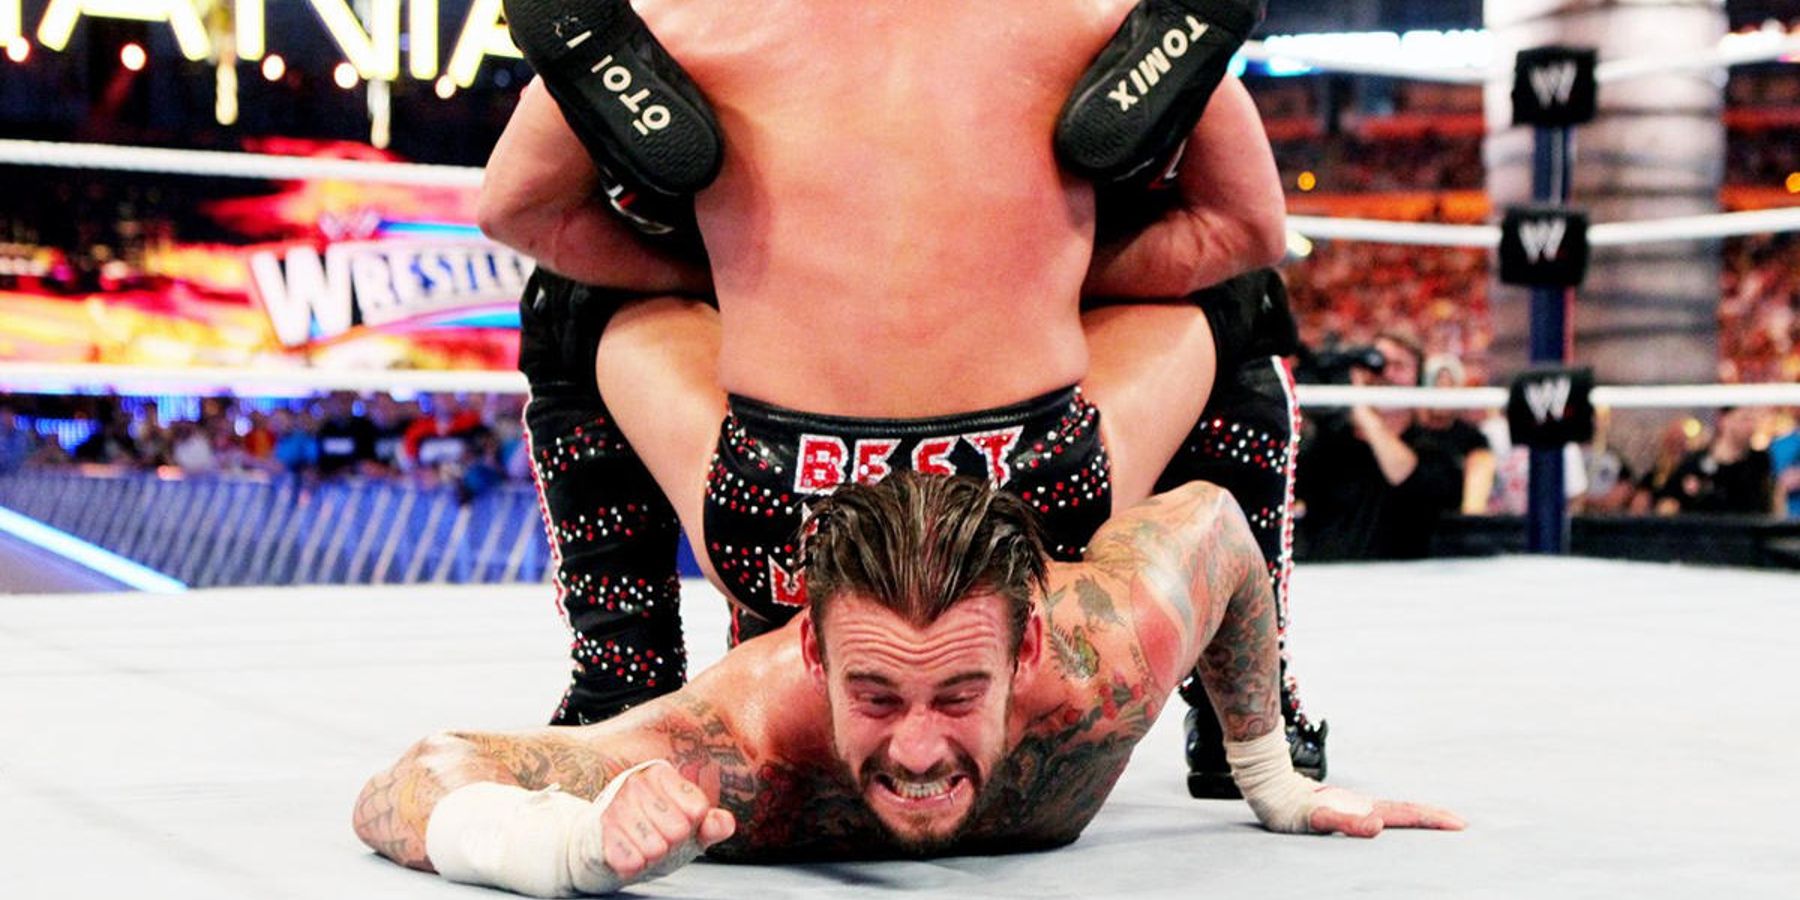 Chris Jericho locks CM Punk into a submission hold during WrestleMania when both men were in WWE.